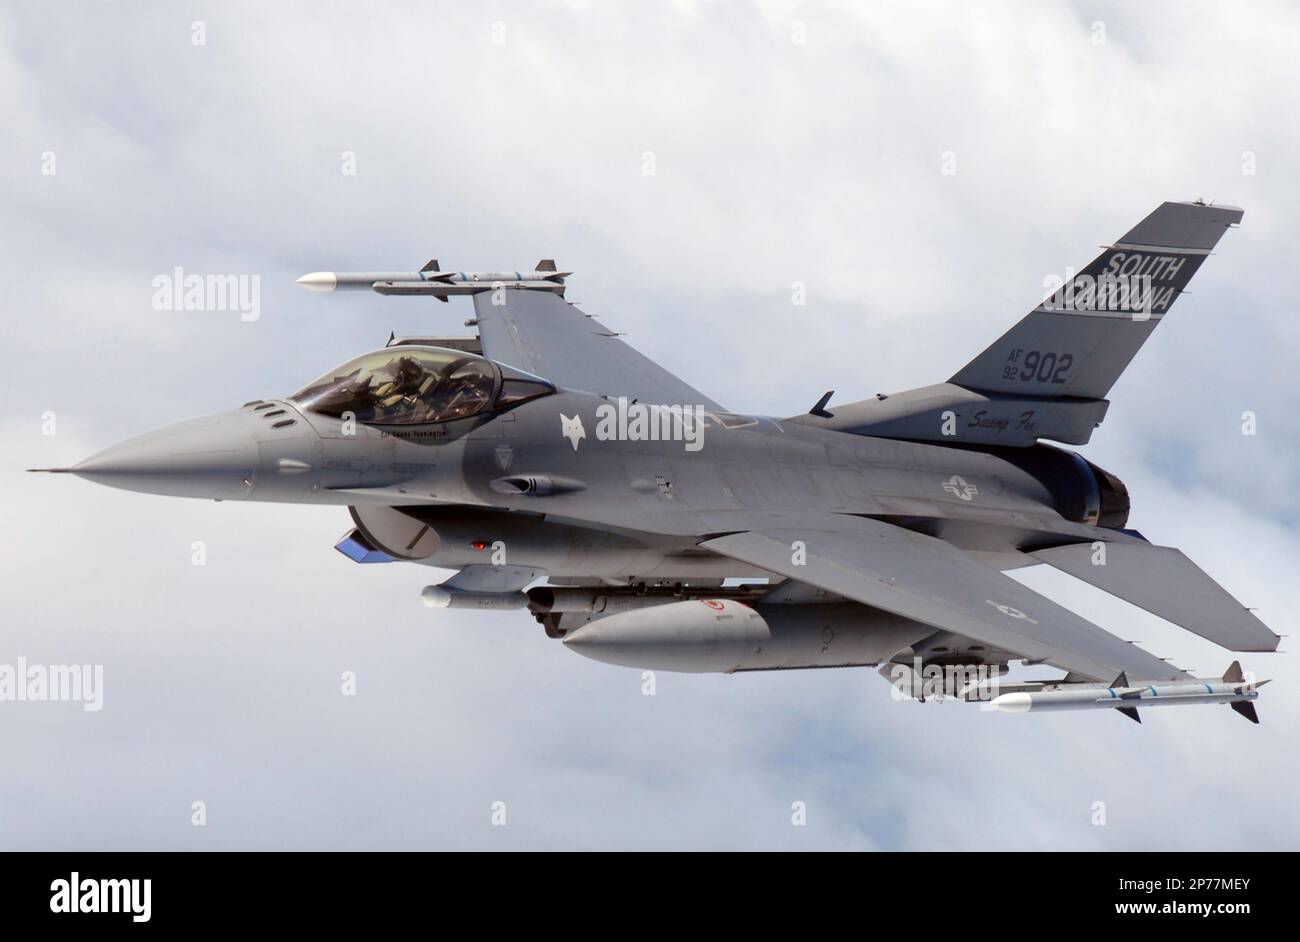 GENERAL DYNAMICS F-16C Fighting Falcon multirole fighter of the South Carolina Air National Guard equpiied with air-to-air missiles, bomb ra k, targeting pods and ECM pods. Stock Photo